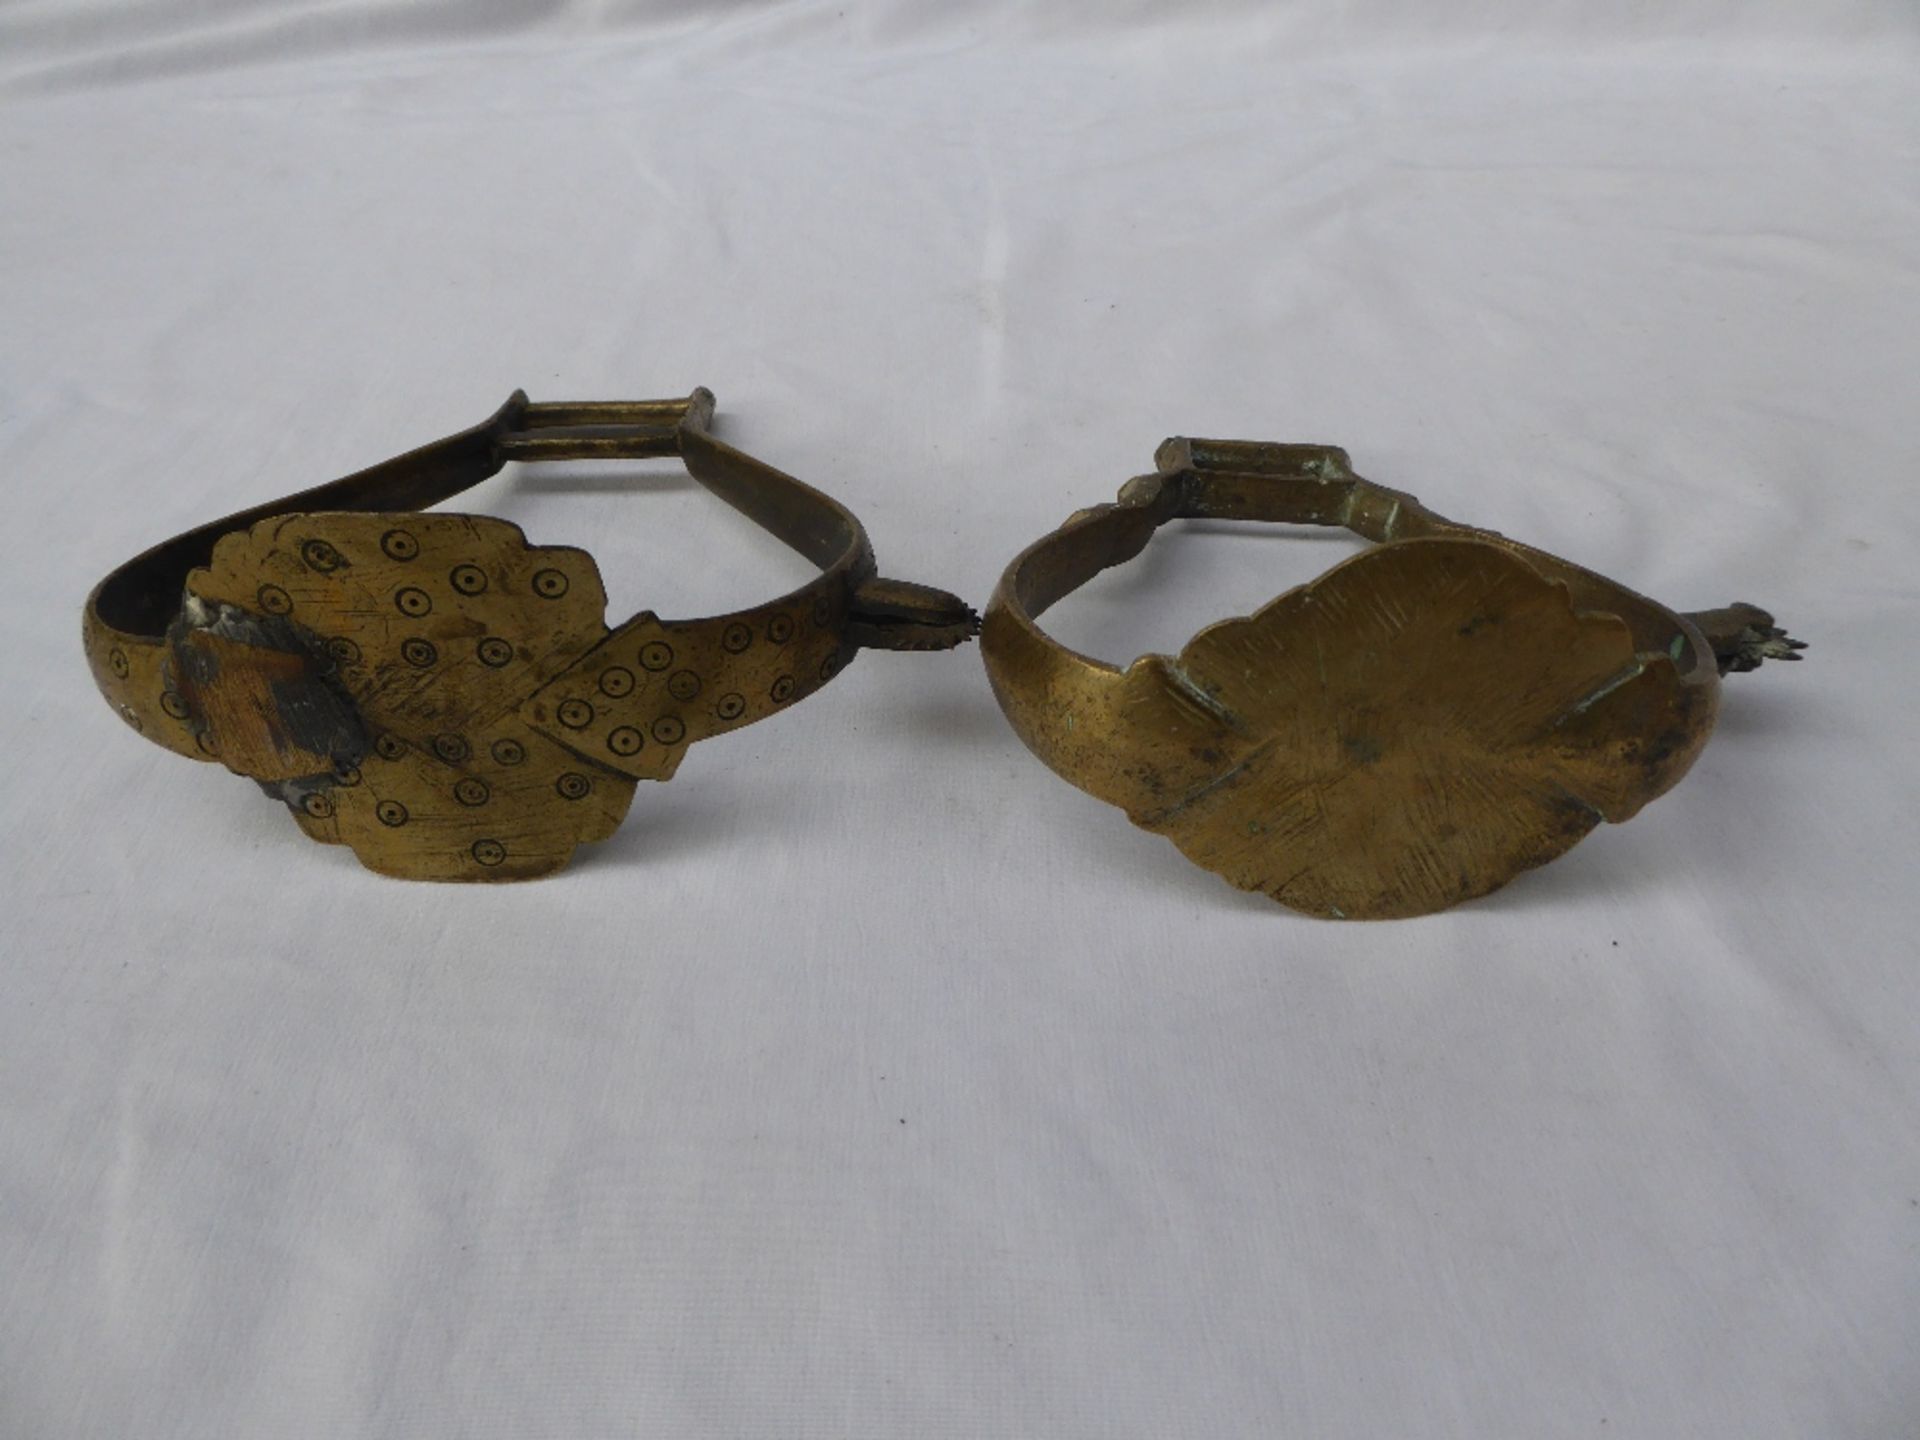 2 South American stirrups with rowelled spurs incorporated in the sides. - Image 2 of 5